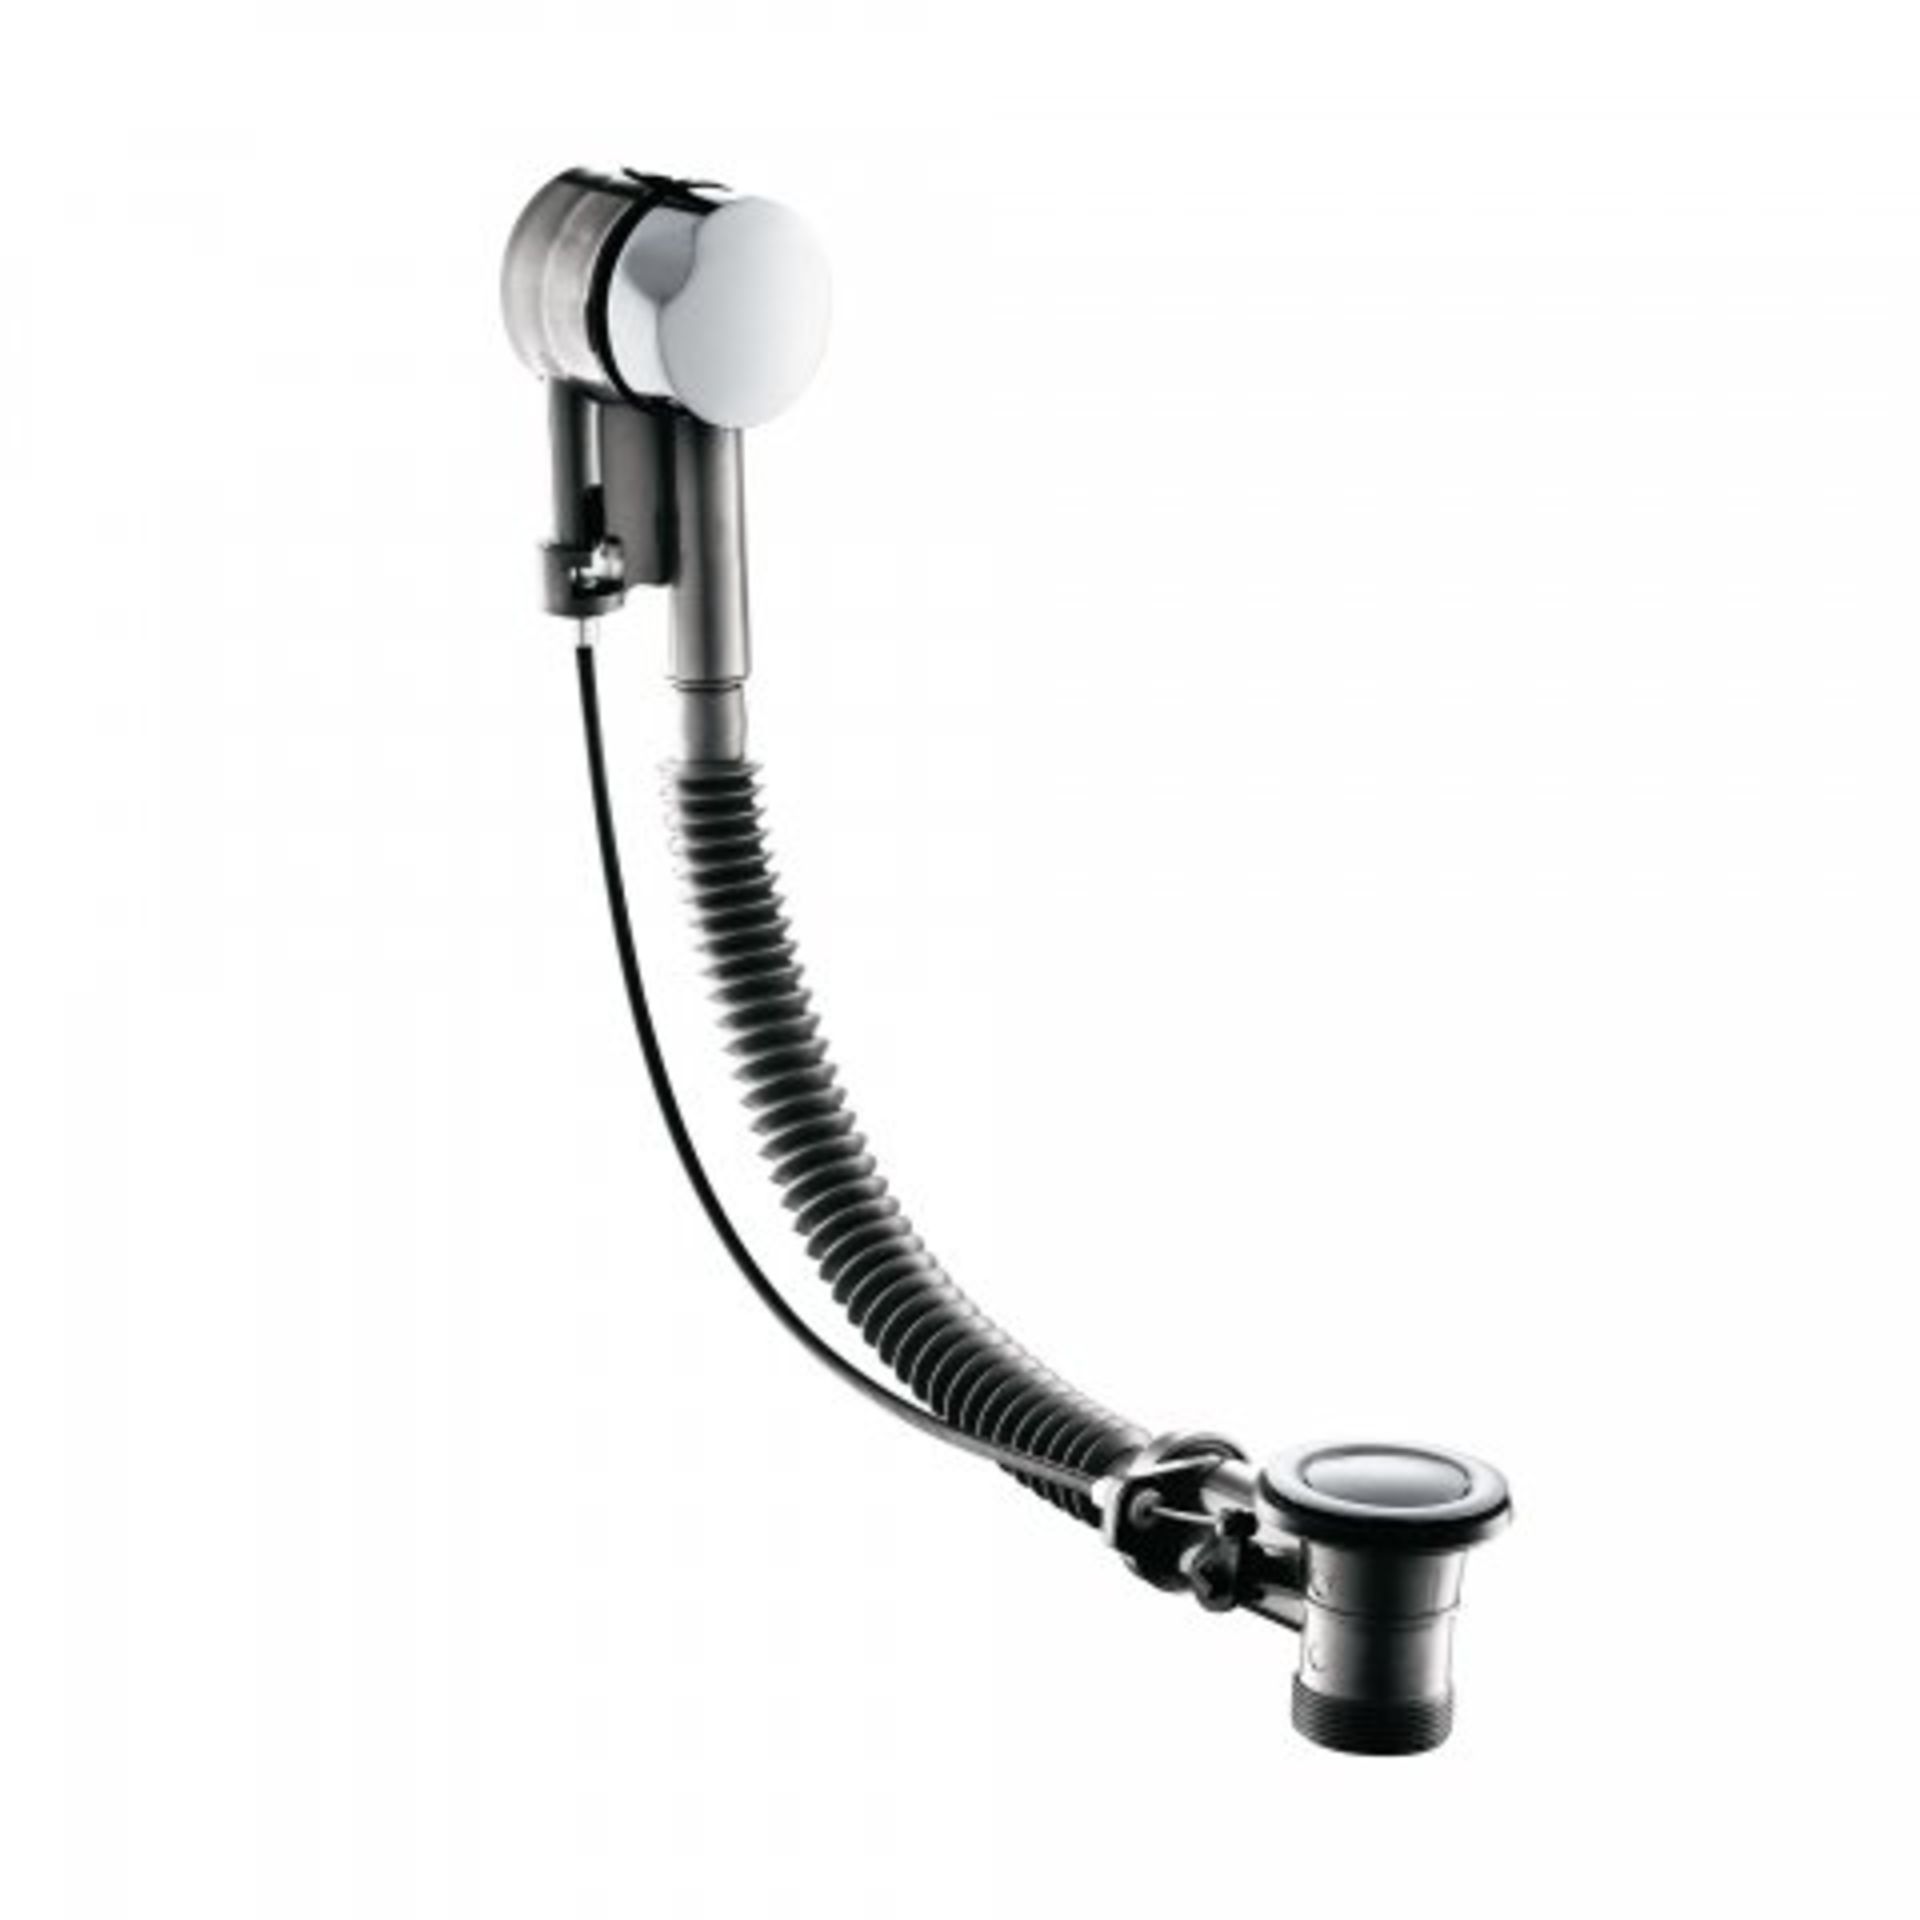 (O90) Bath Pop Up Waste - Overflow This bath pop-up waste overflow features a durable flex pipe